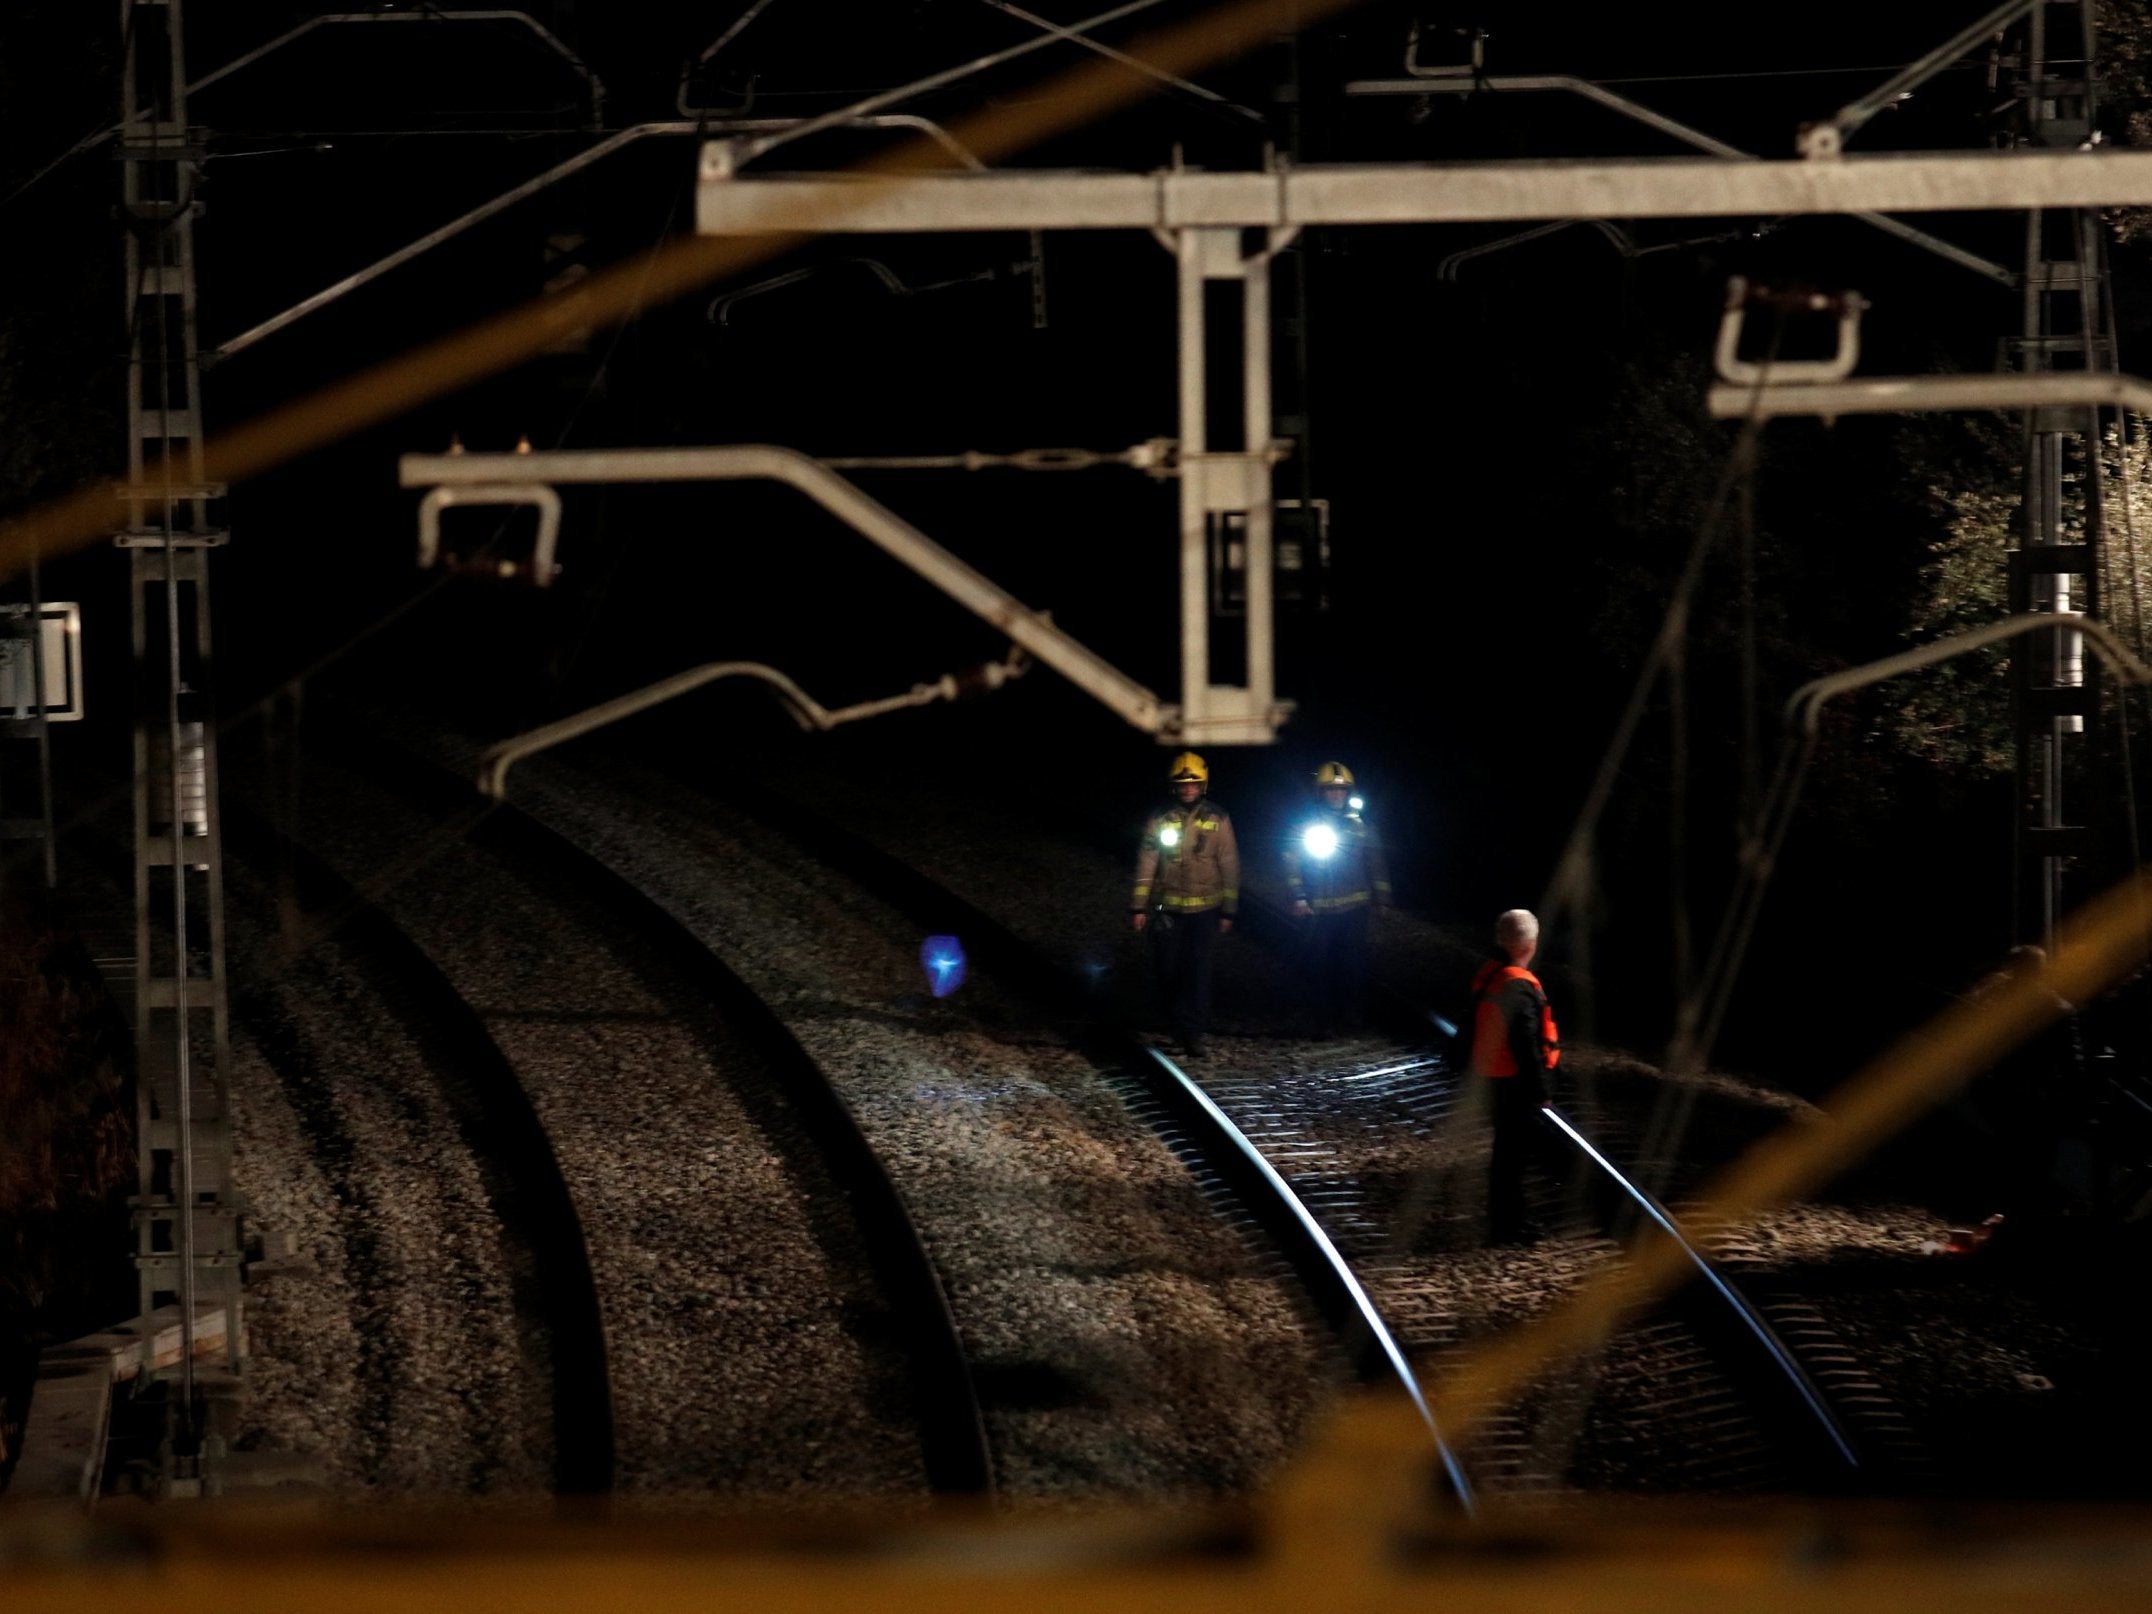 Security personnel inspect the railway after a train crash near Manresa